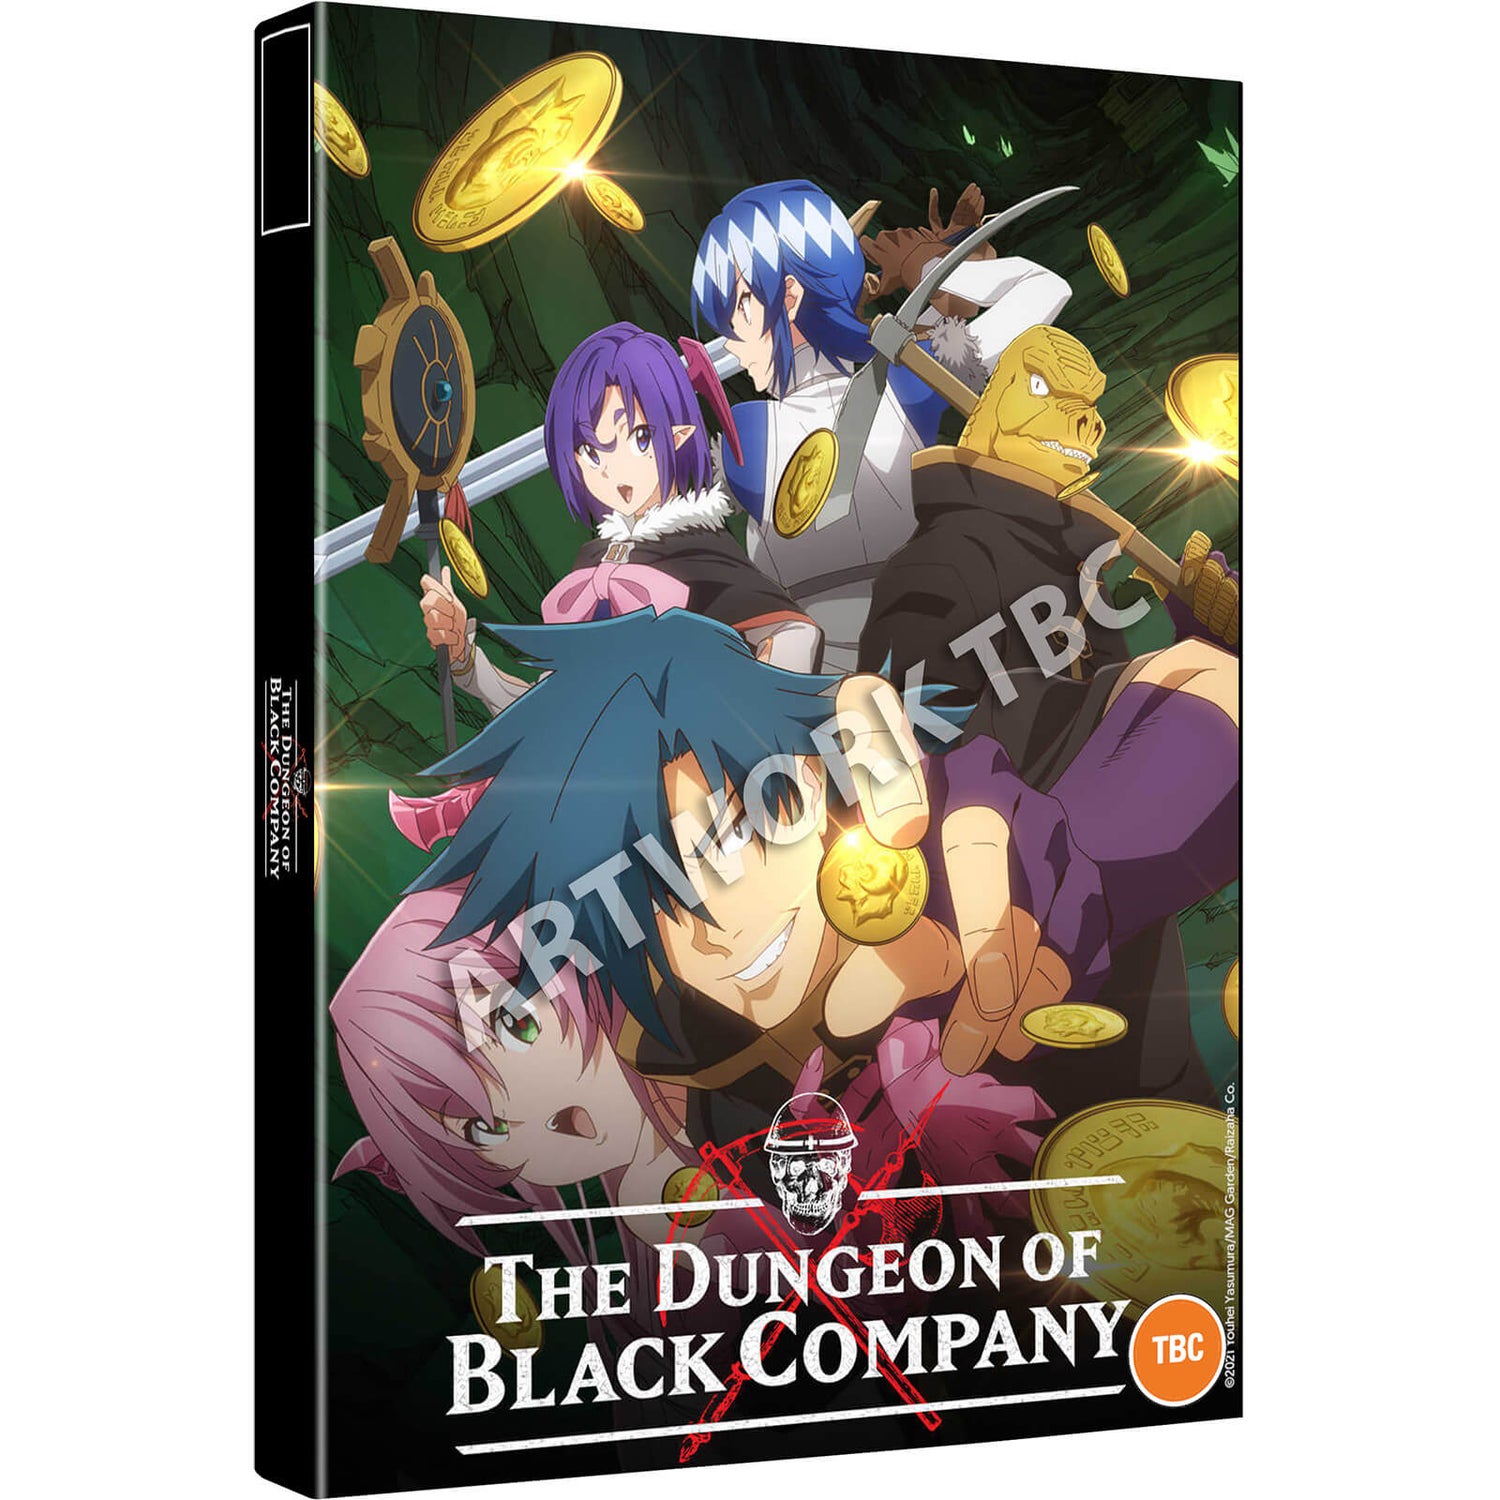 The Dungeon of Black Company - The Complete Season